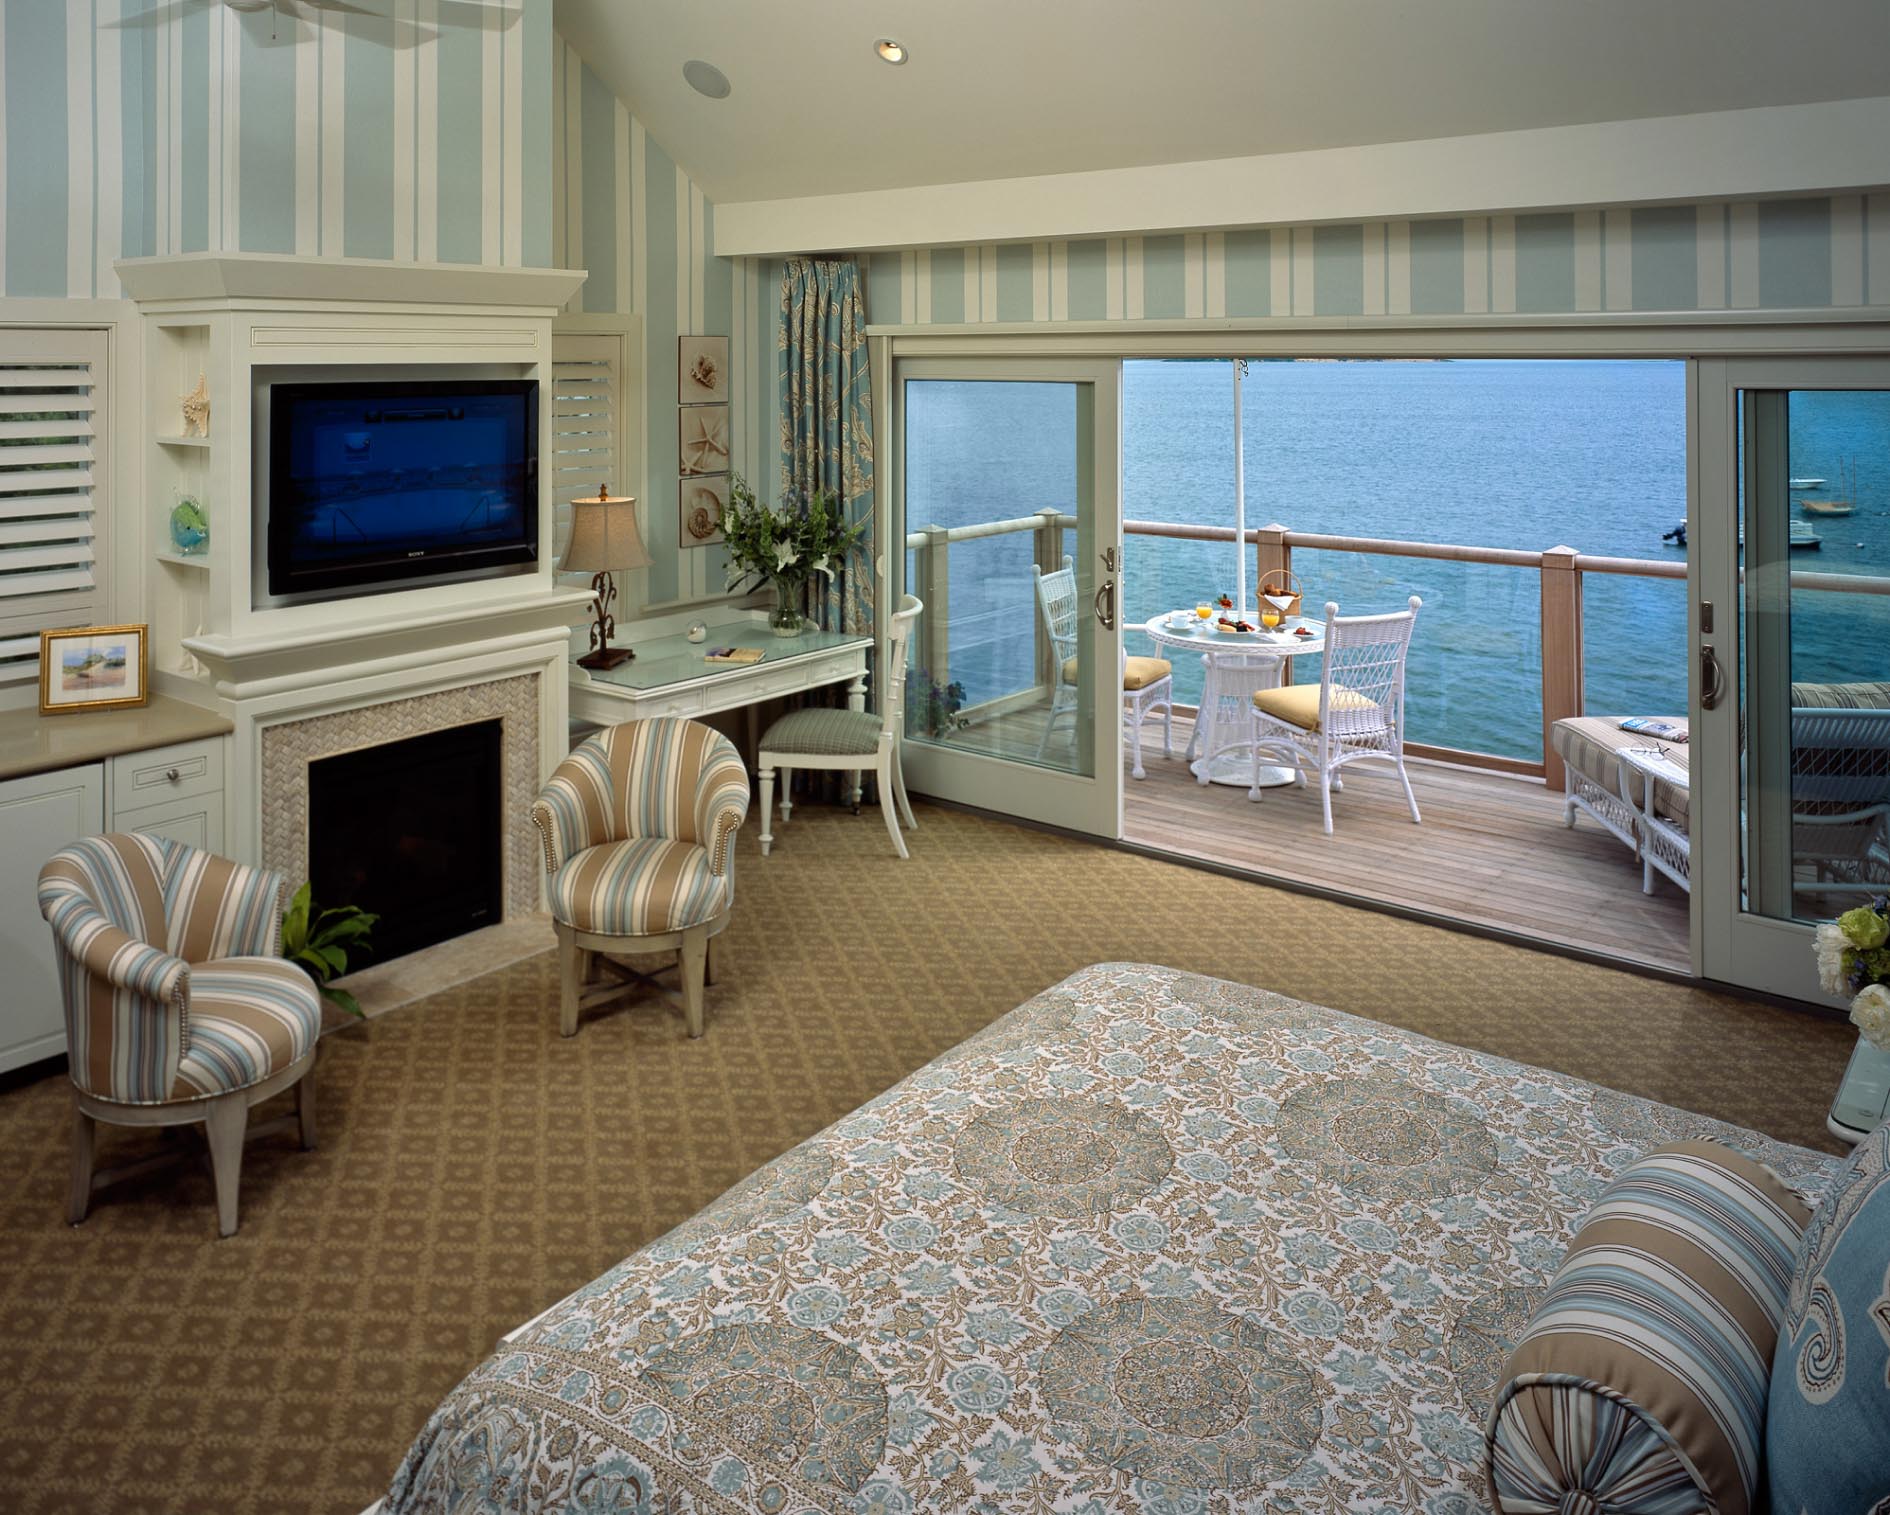 Hotel room on Cape Cod with an ocean view.